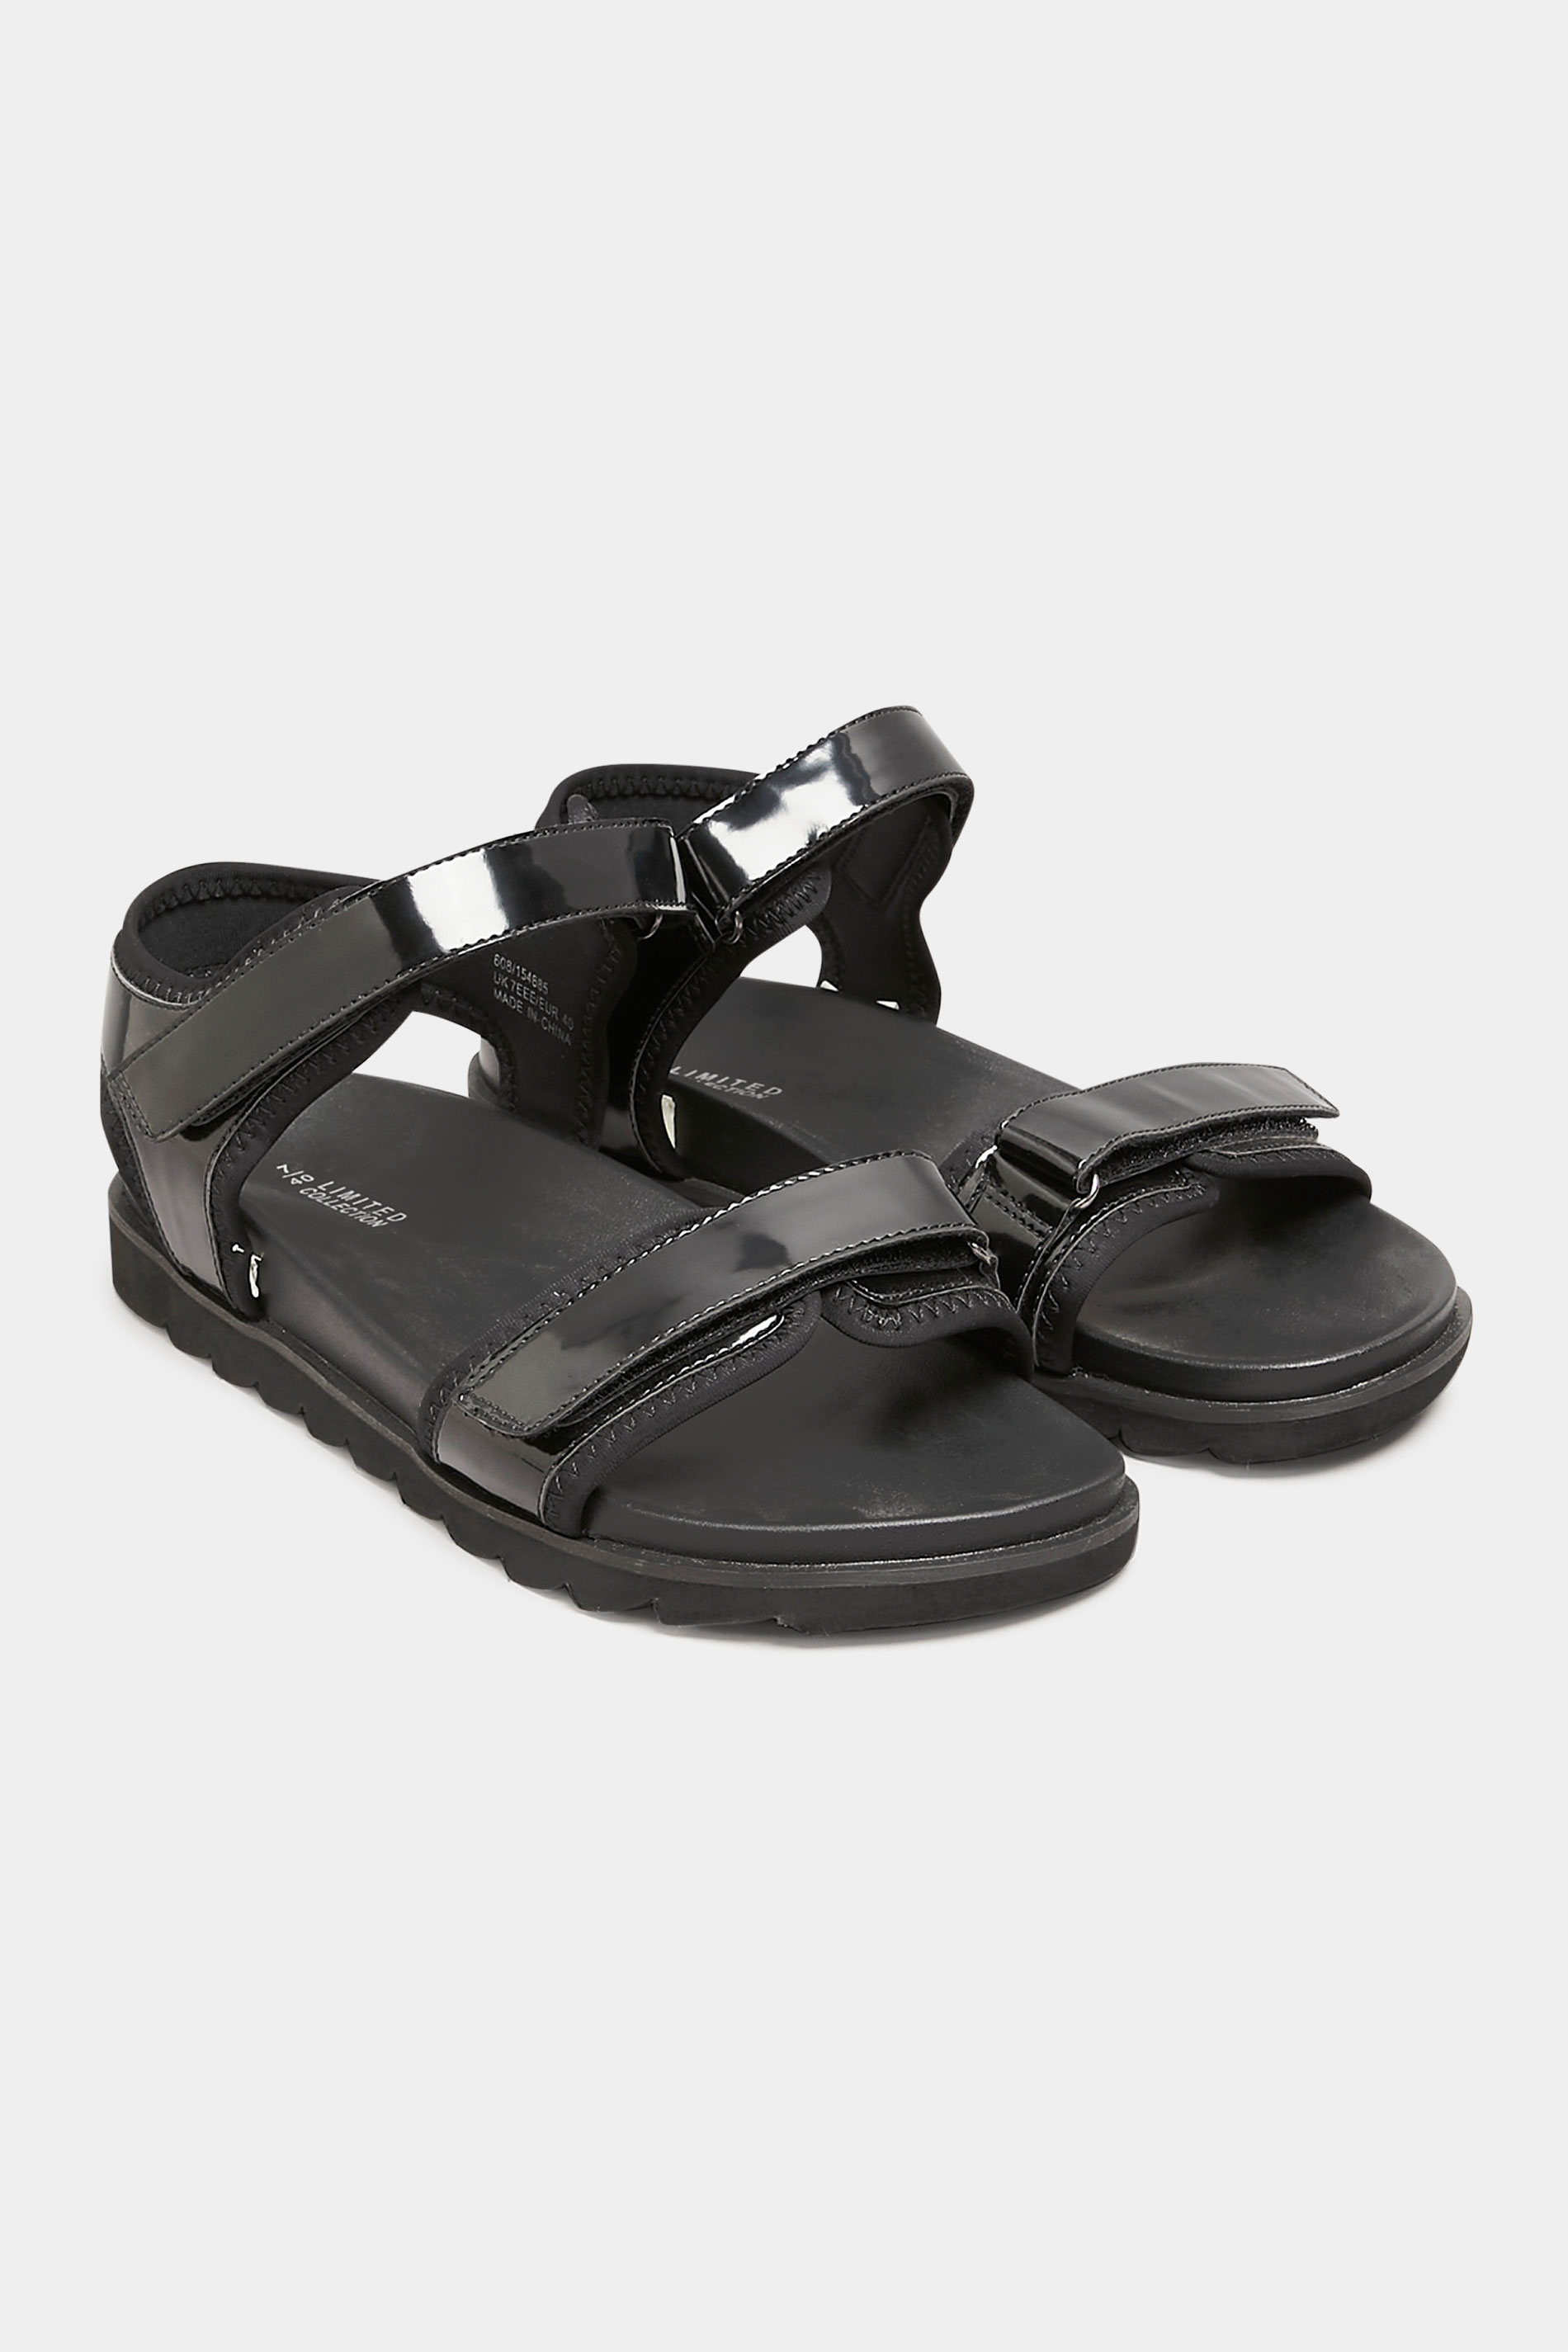 Black Patent Velcro Sandals In Extra Wide EEE Fit_AR.jpg